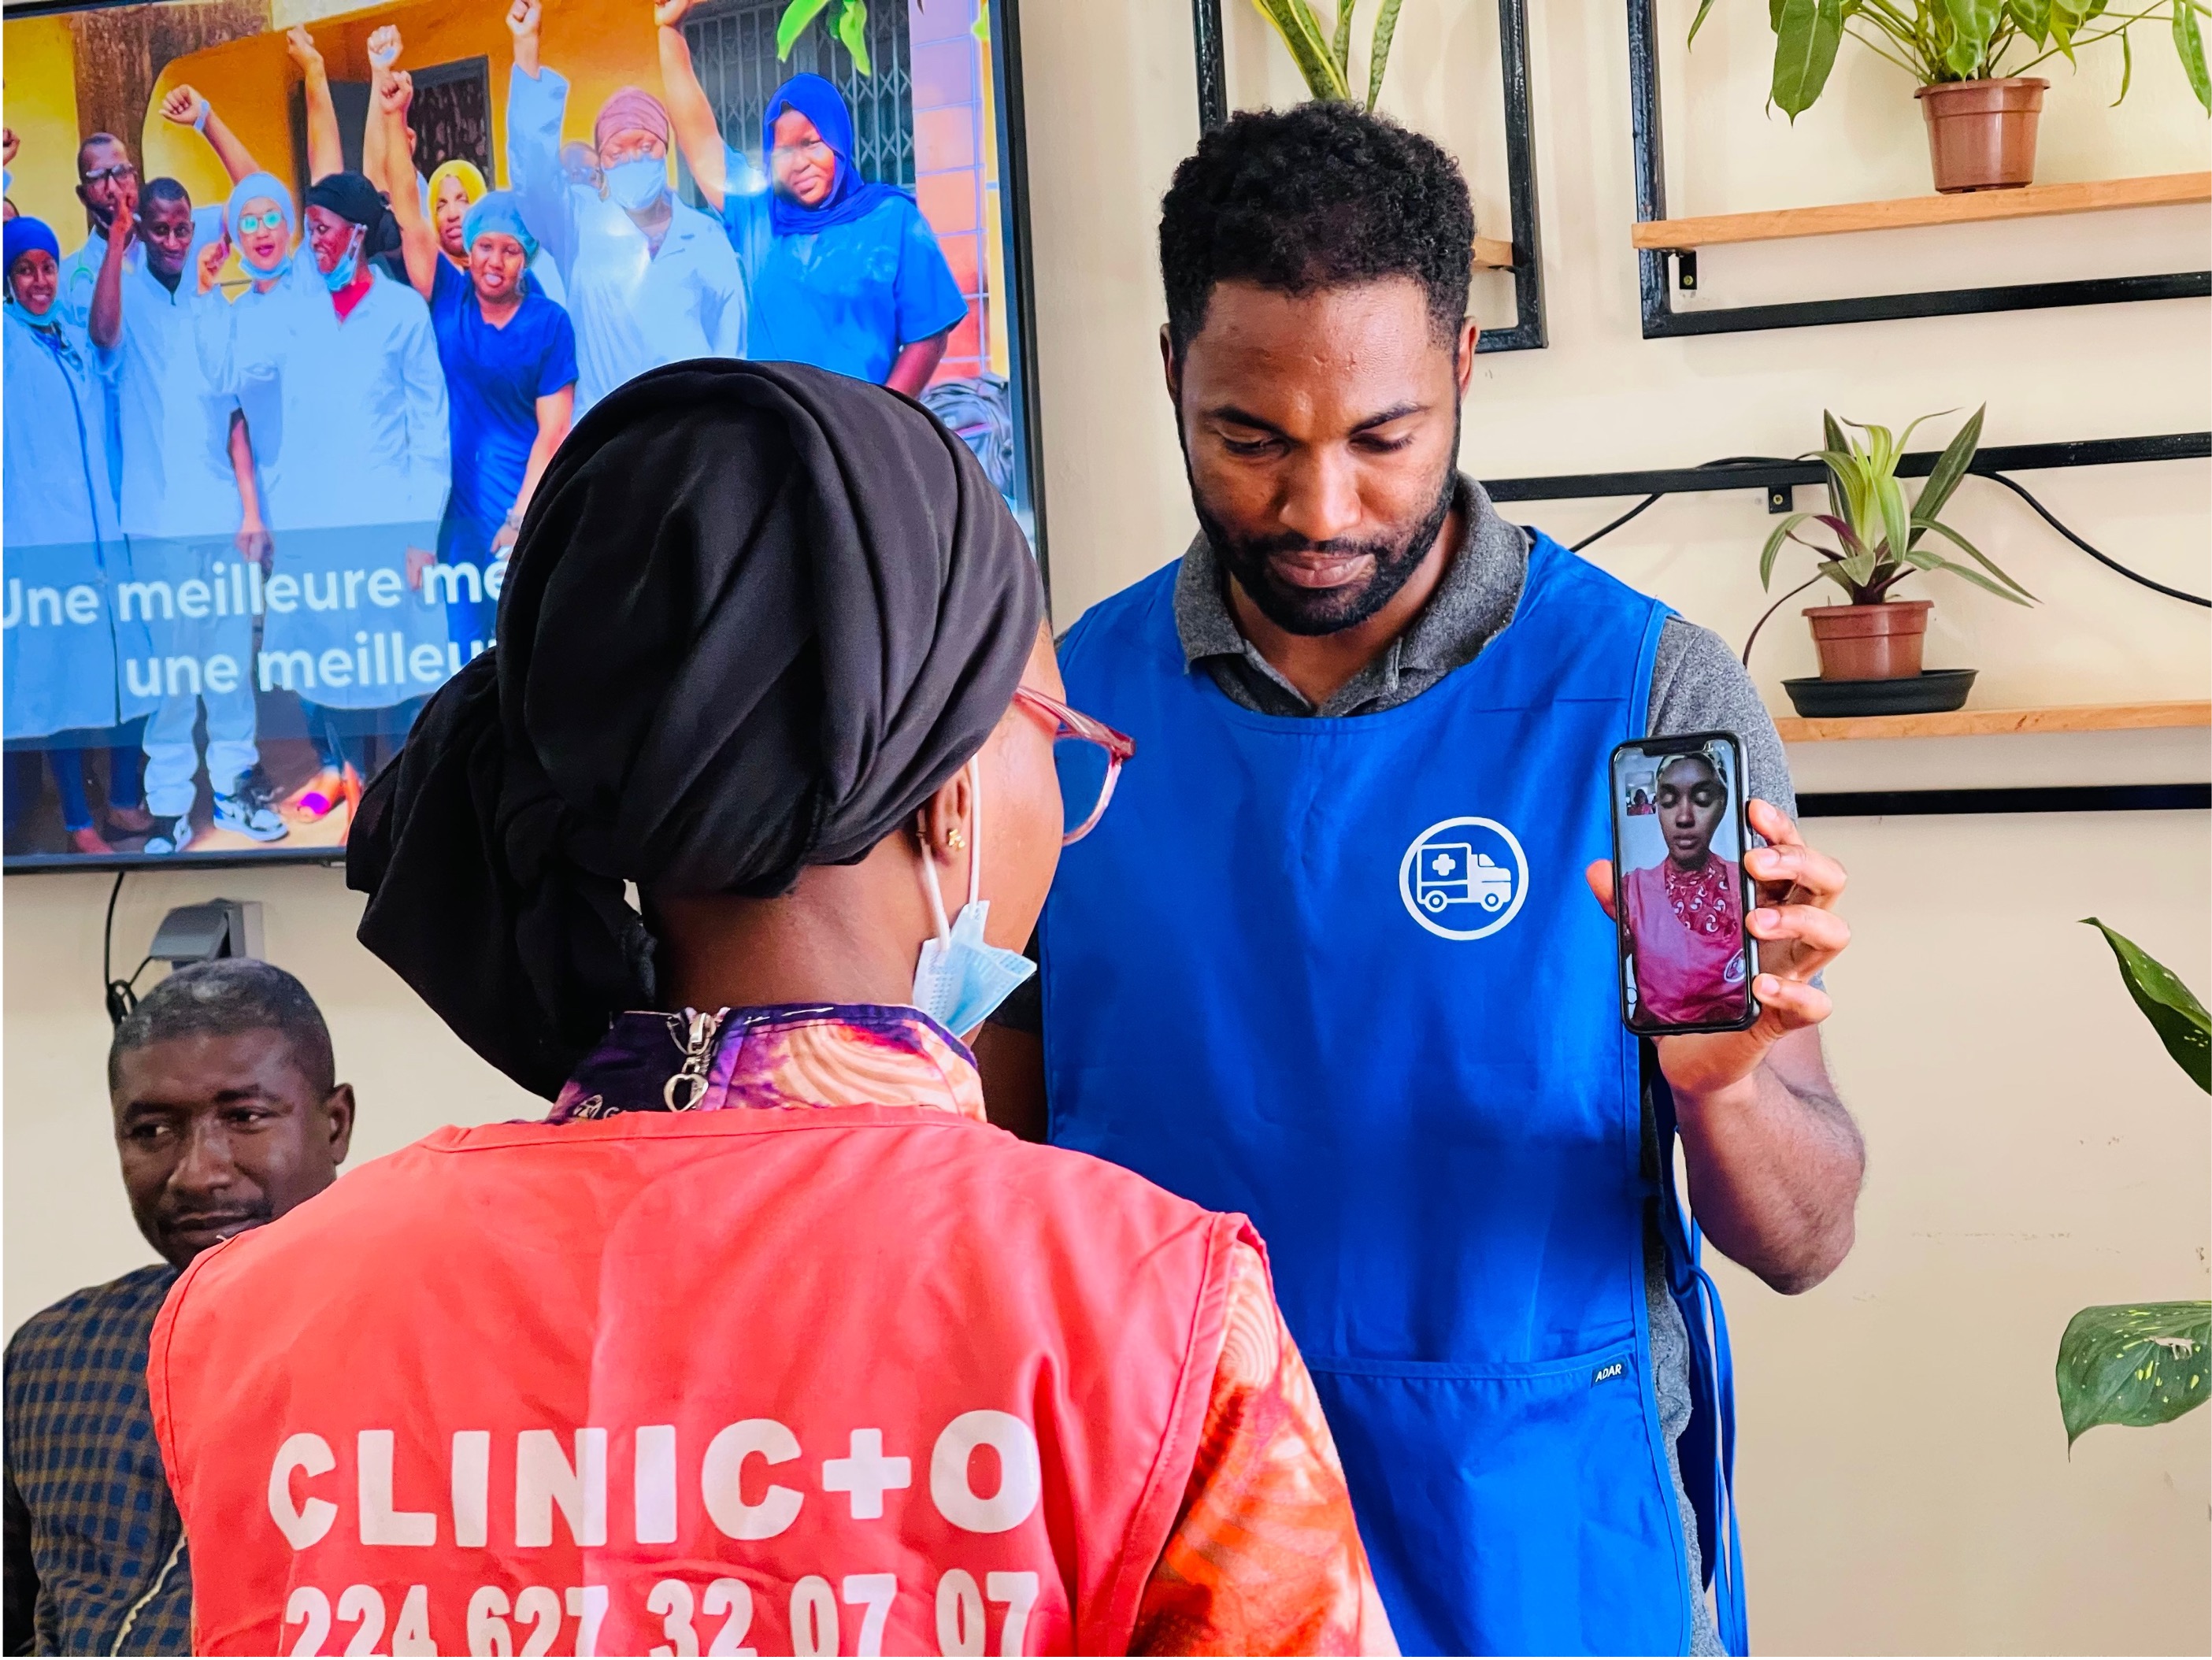 Nasser Diallo in blue vest showing a Clinic+O health worker in a pink vest how the mobile app works. He's holding a phone in one hand in his clinic.